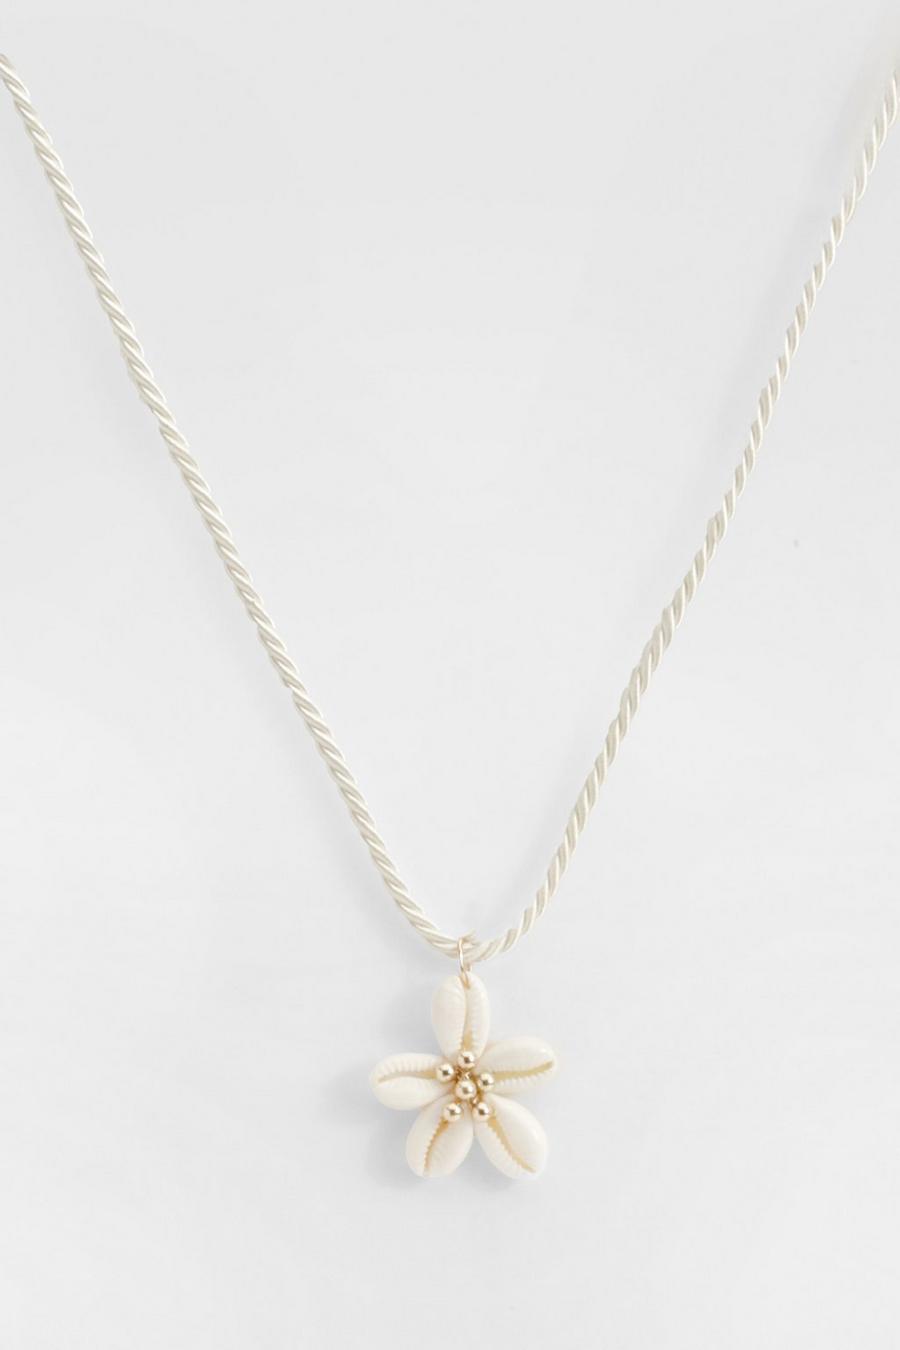 Ivory Shell Detailed Flower Rope Necklace